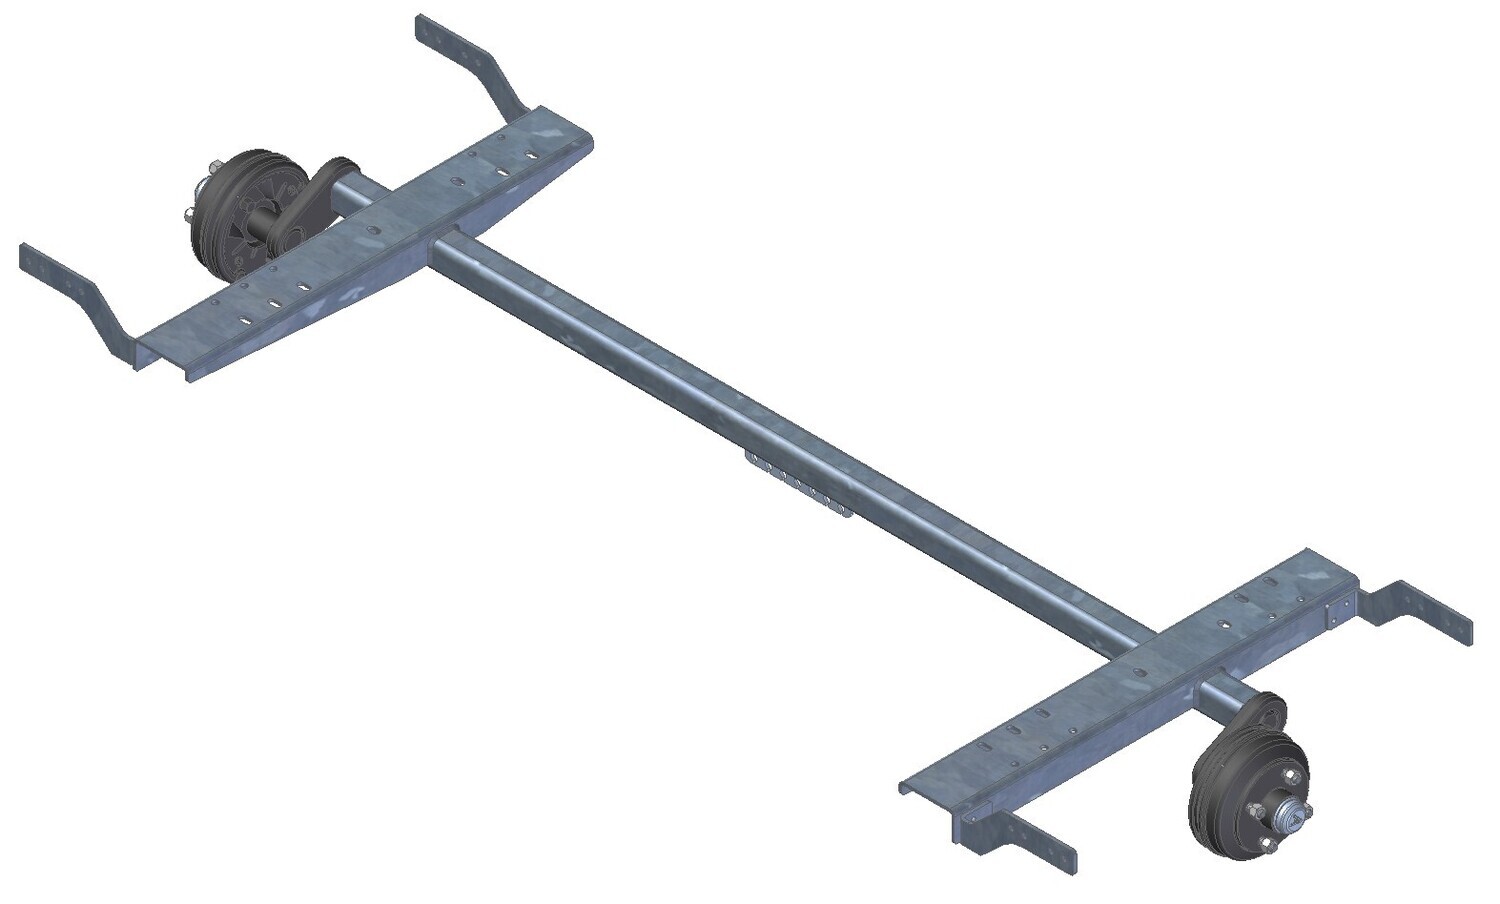 750kg braked trailer axle for 1500mm wide chassis